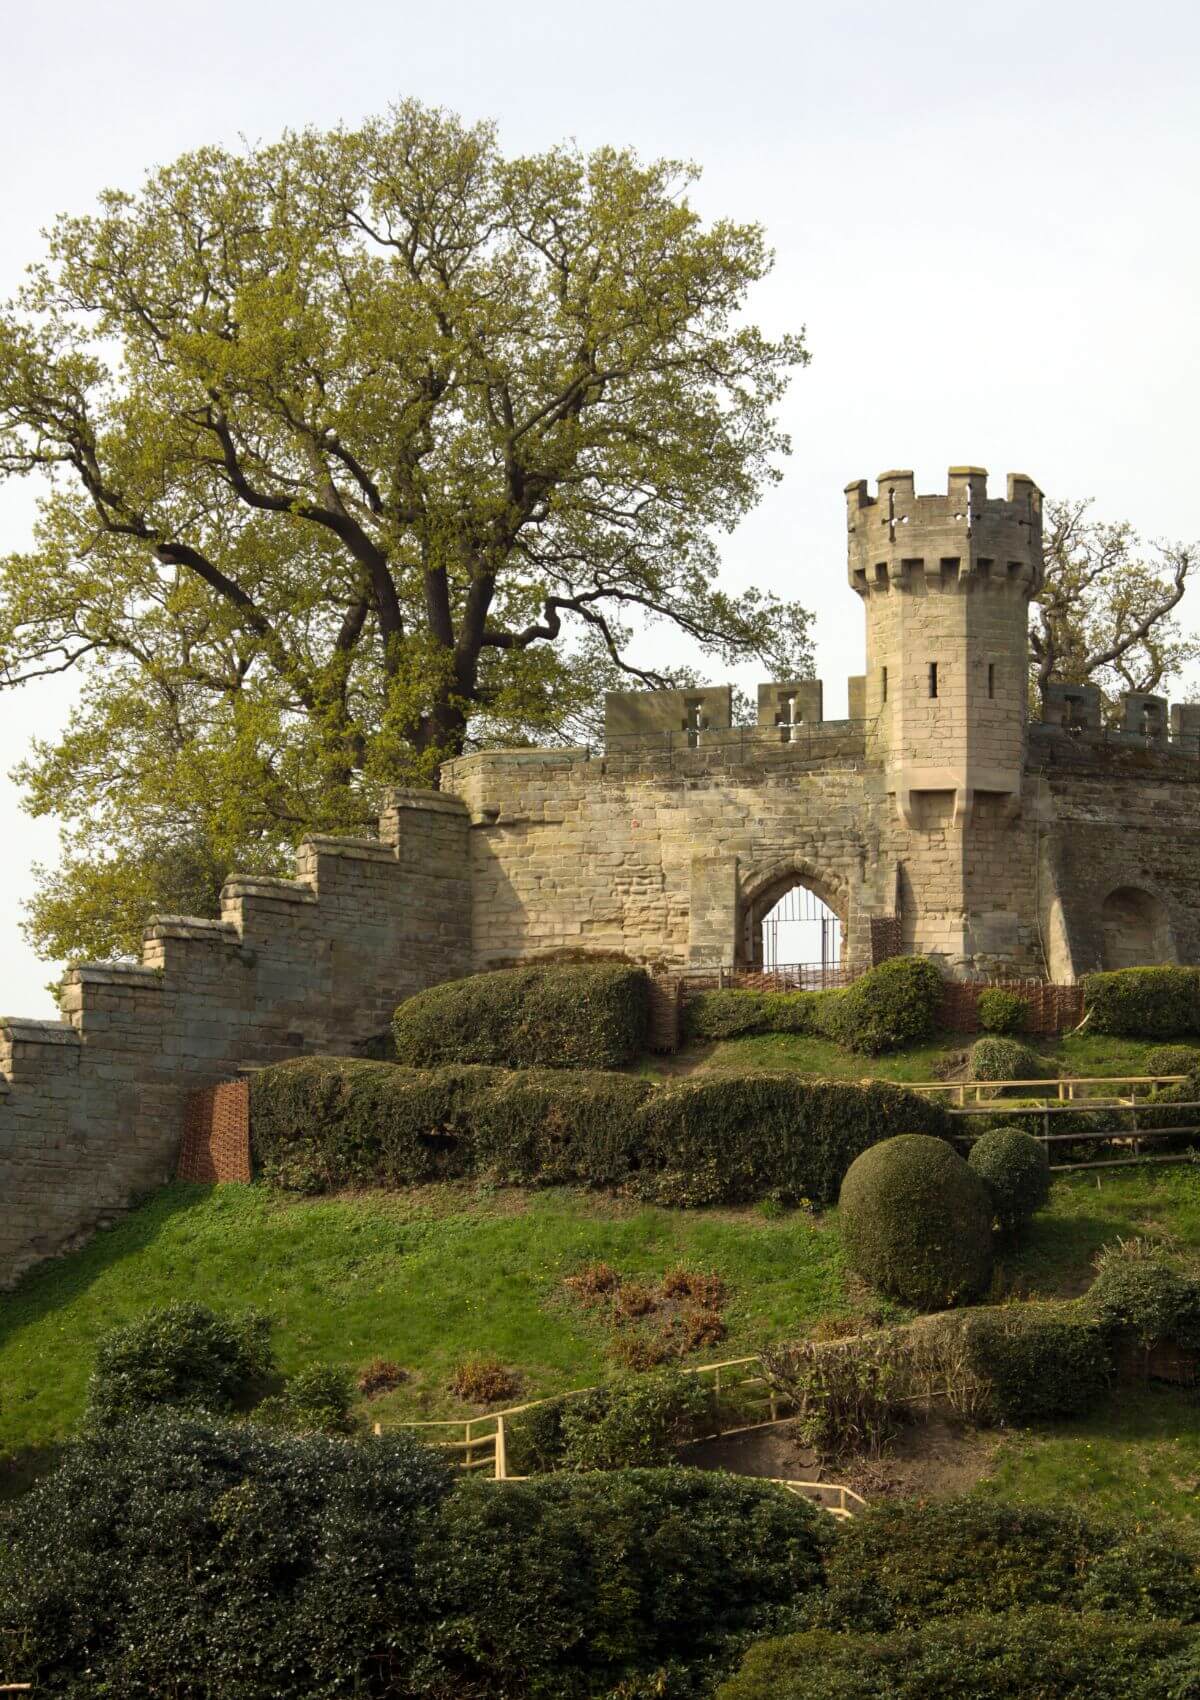 Warwick Castle is home to one of England's best mazes